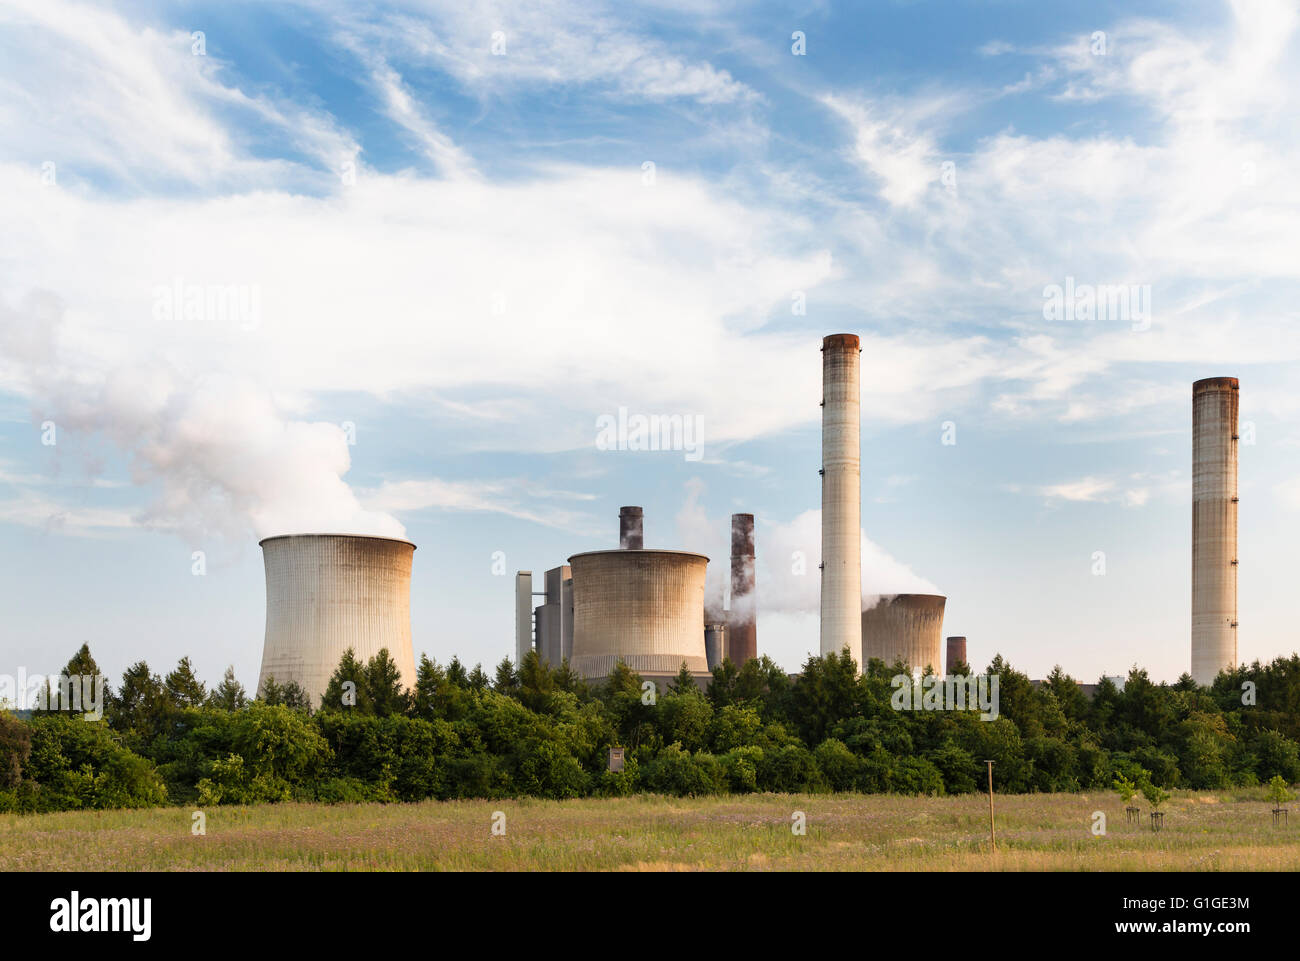 A large coal-fired power station behind some trees and a field. Stock Photo